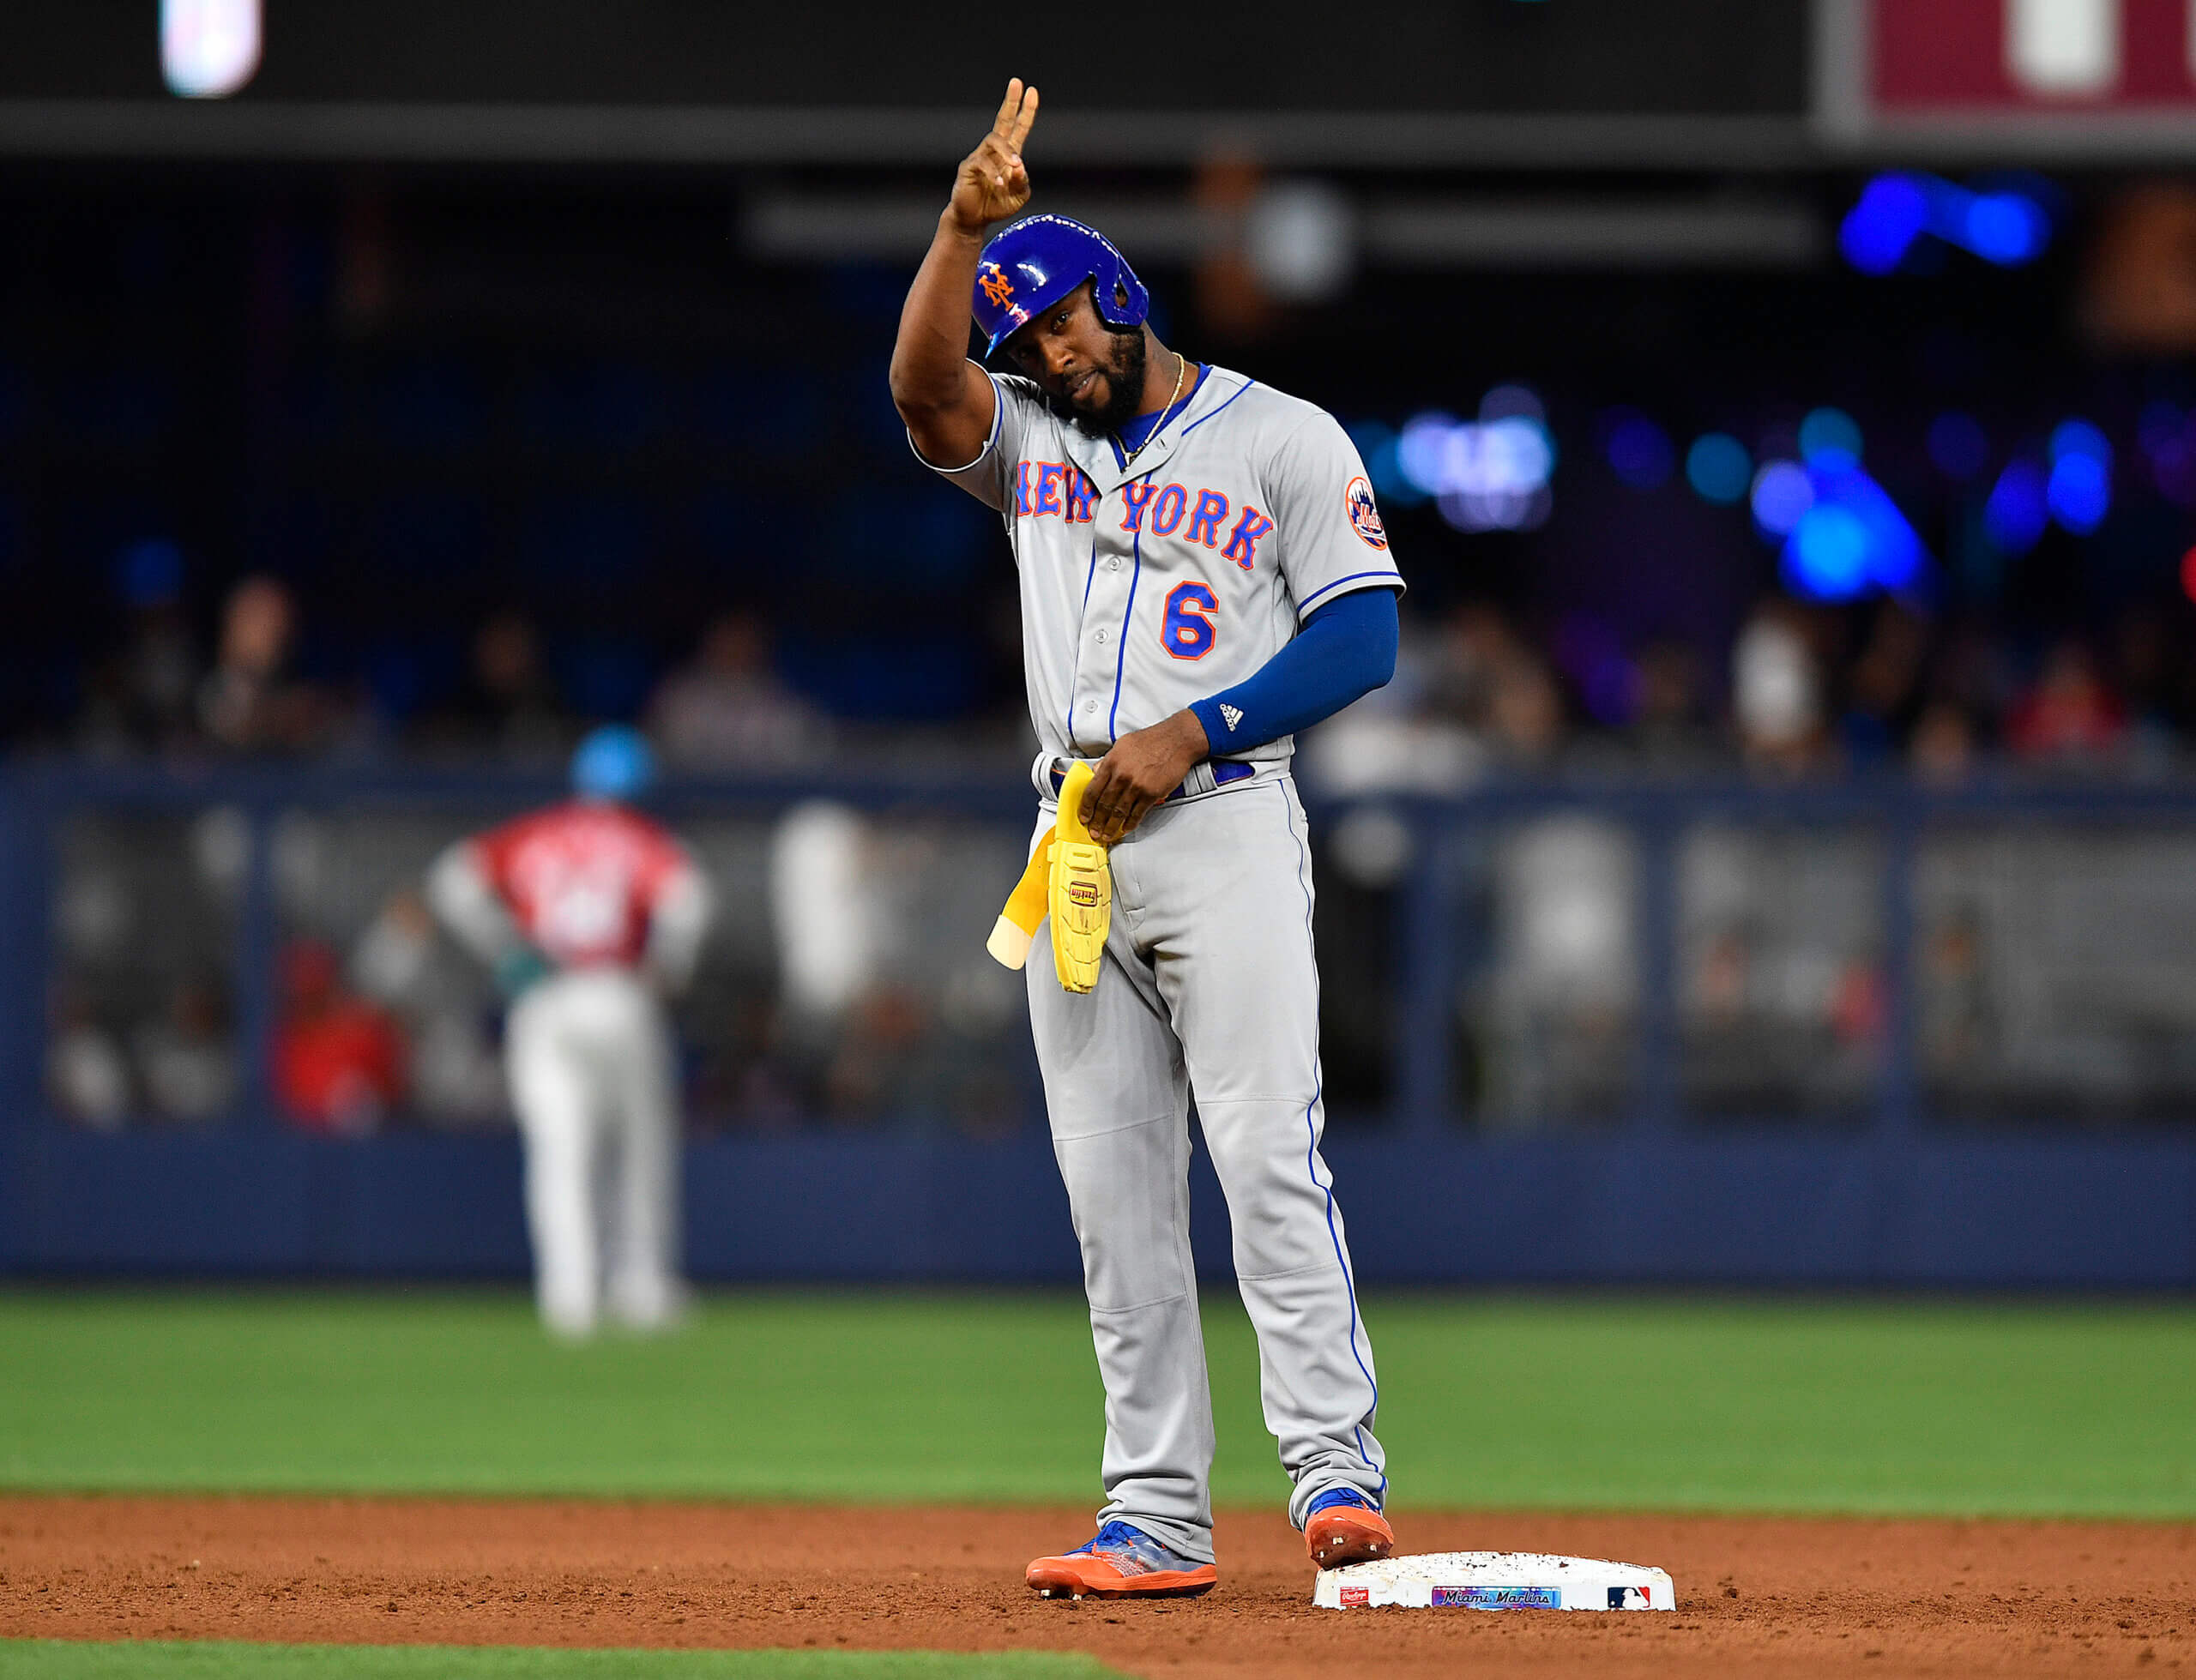 Mets RF Starling Marte says he will be ready for opening day